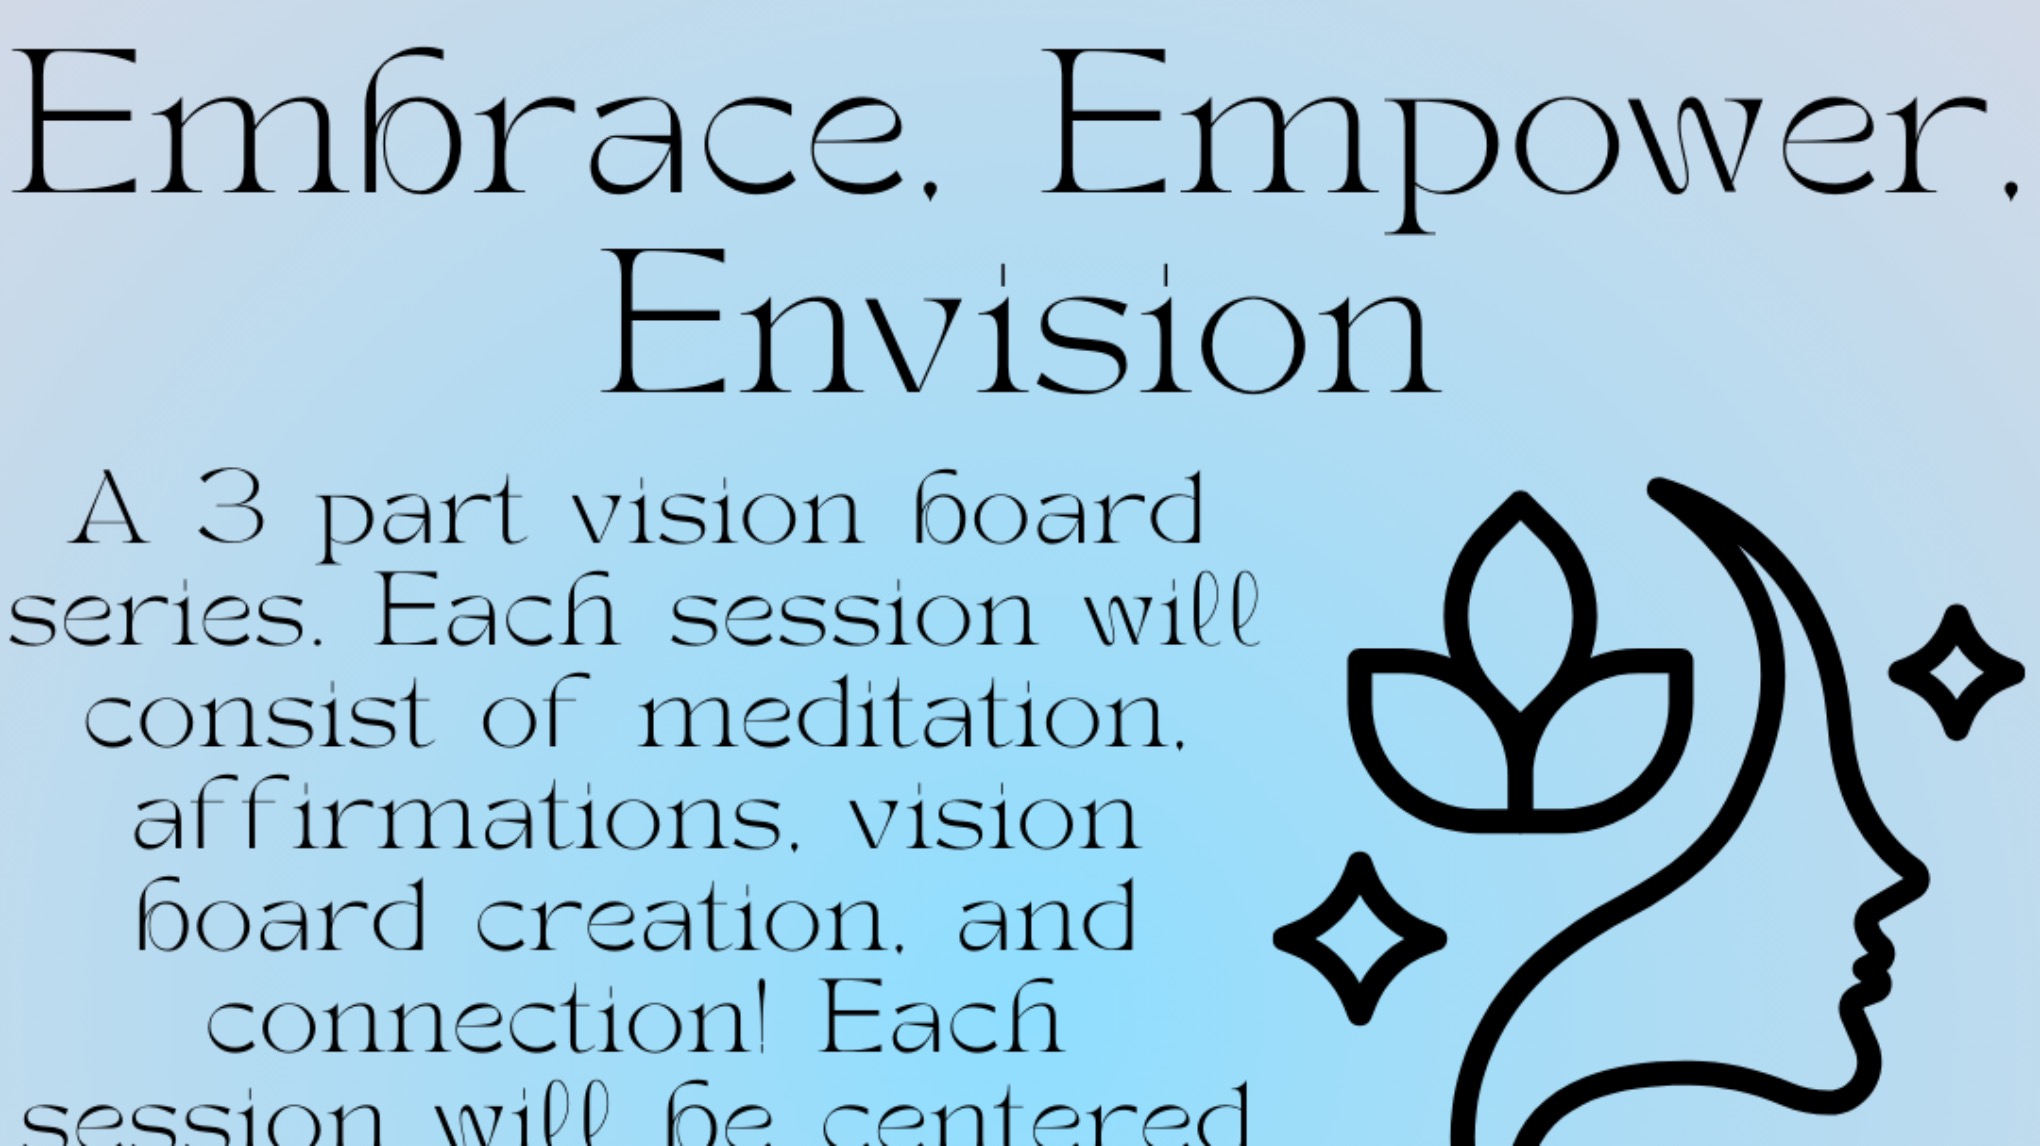 Embrace, Empower, Envision 3